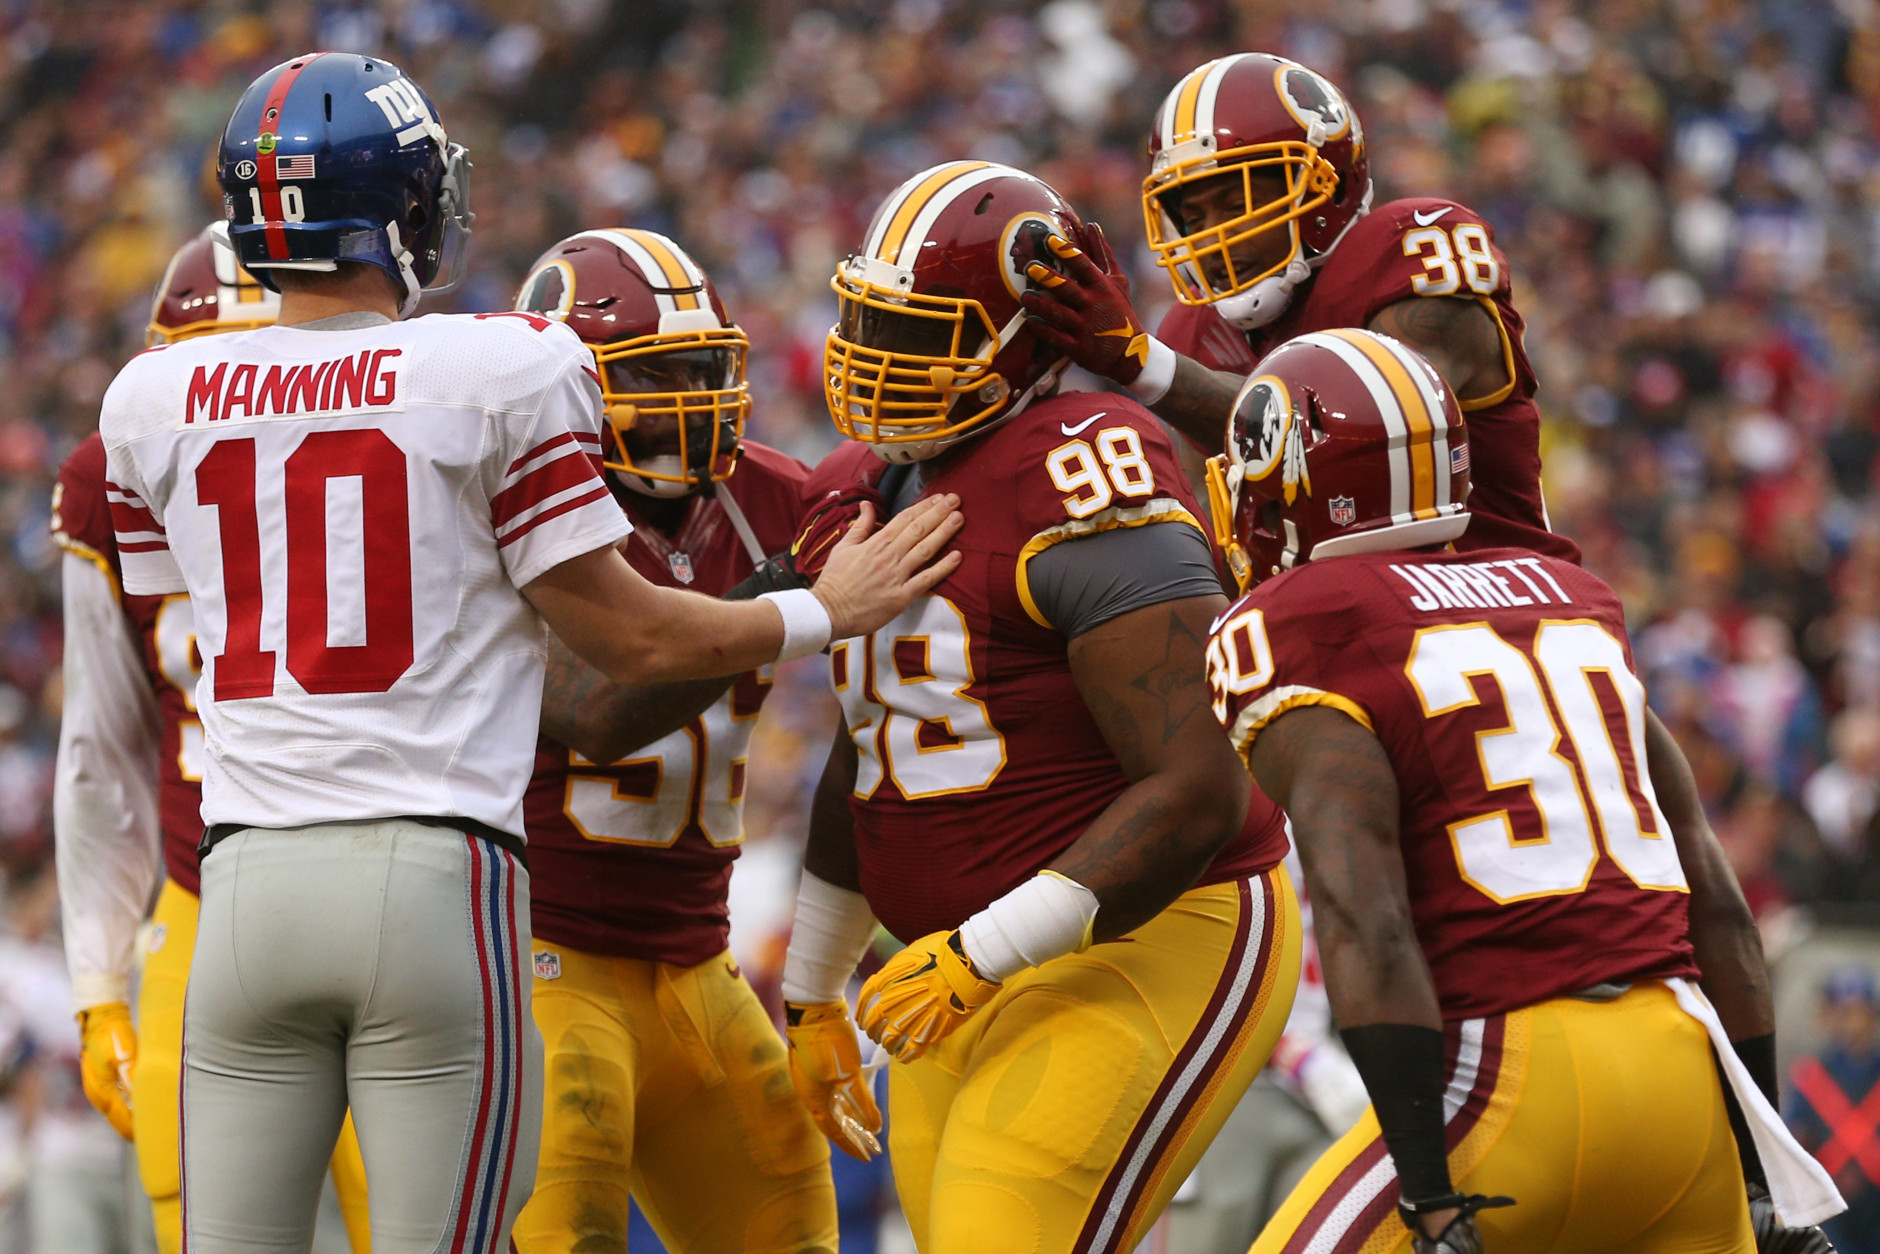 LANDOVER, MD - NOVEMBER 29: Defensive tackle Terrance Knighton #98, free safety Dashon Goldson #38 strong safety Kyshoen Jarrett #30 of the Washington Redskins react after a play while quarterback Eli Manning #10 of the New York Giants looks on in the first quarter at FedExField on November 29, 2015 in Landover, Maryland. (Photo by Patrick Smith/Getty Images)